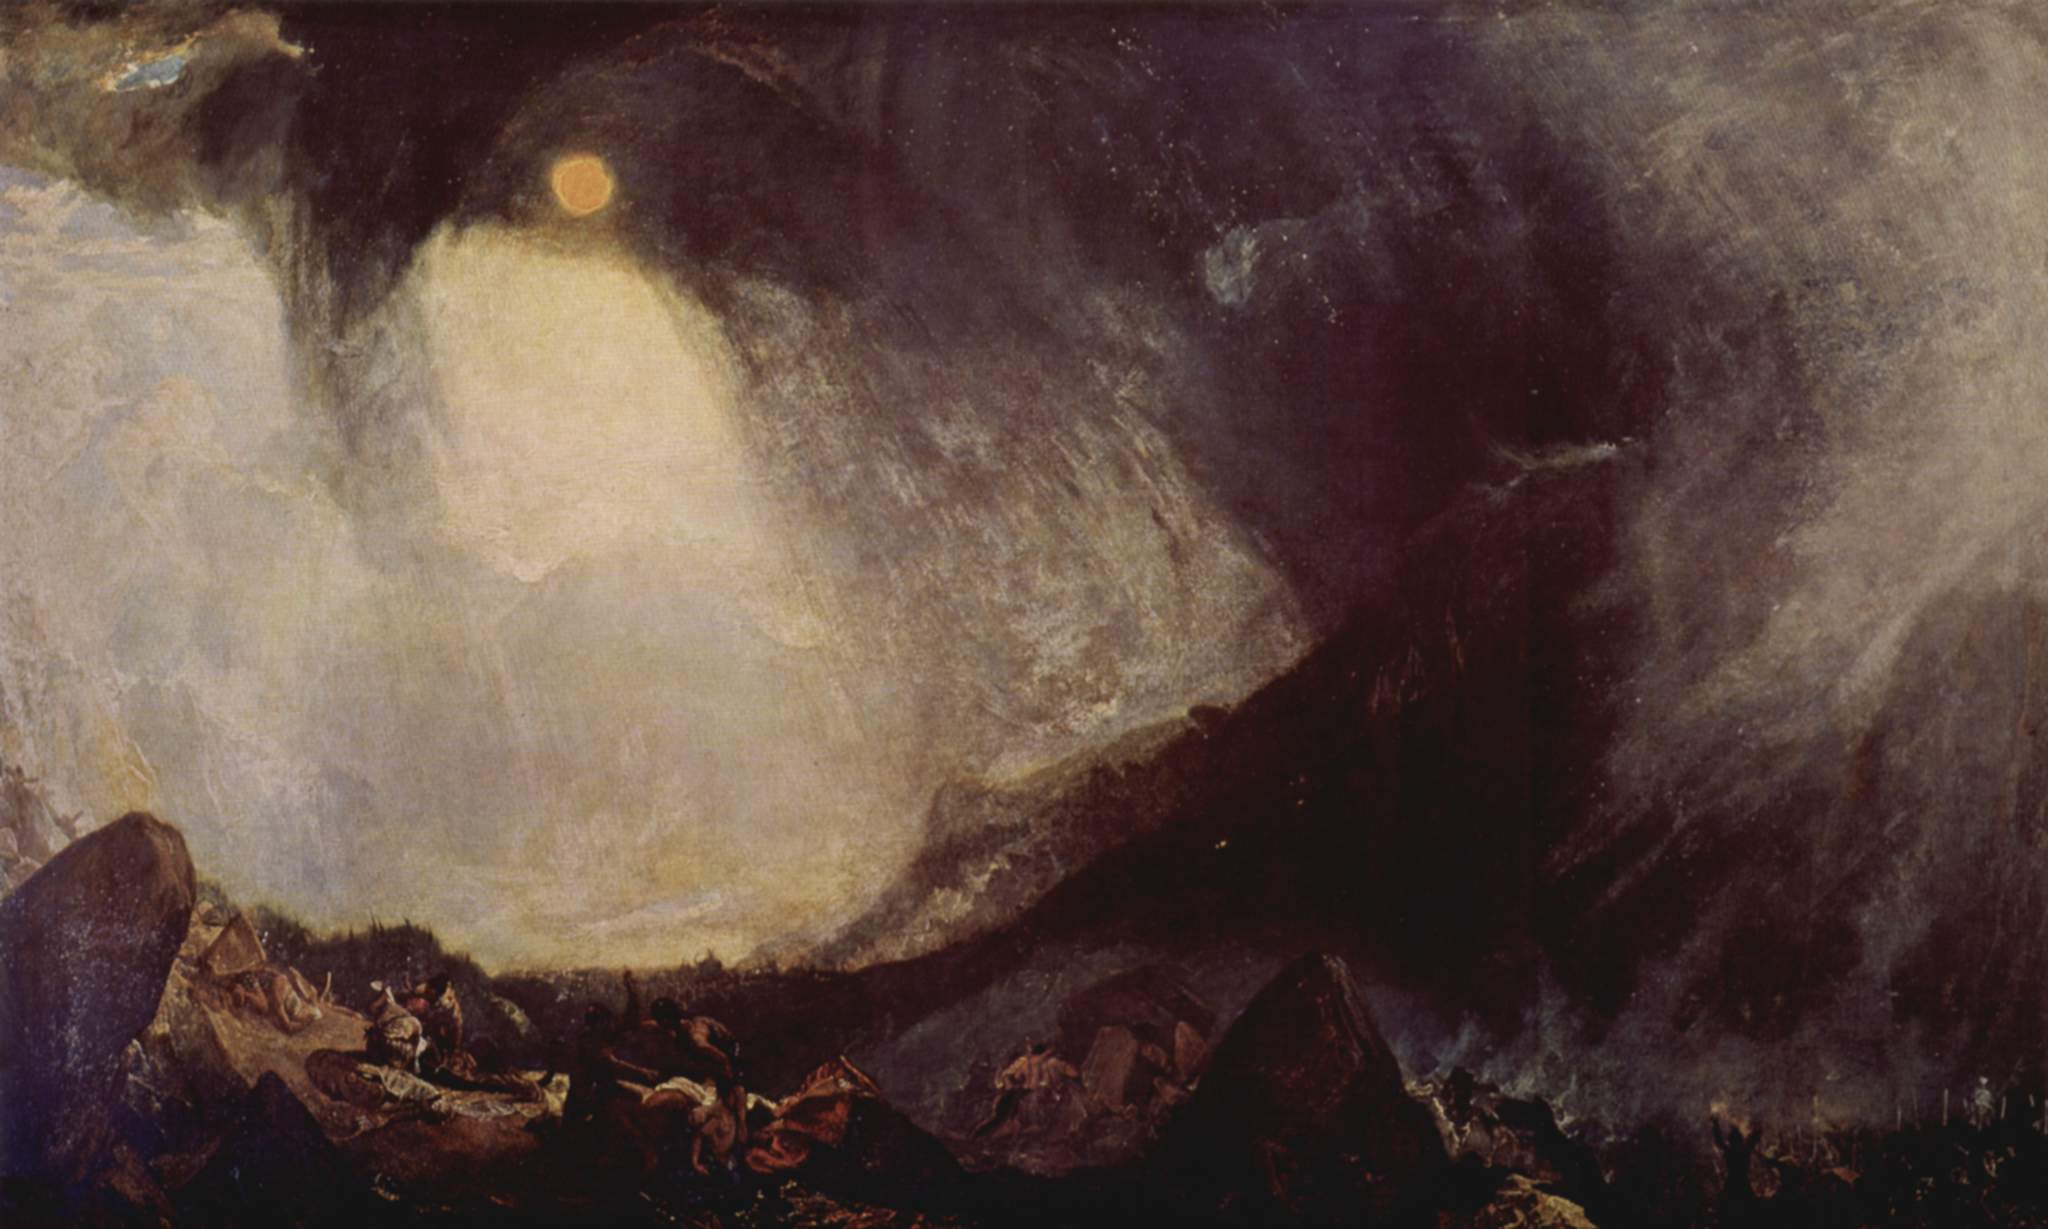 Hannibal and his Men crossing the Alps by Joseph Mallord William Turner - 1812 - 144.7 × 236 cm Tate Modern